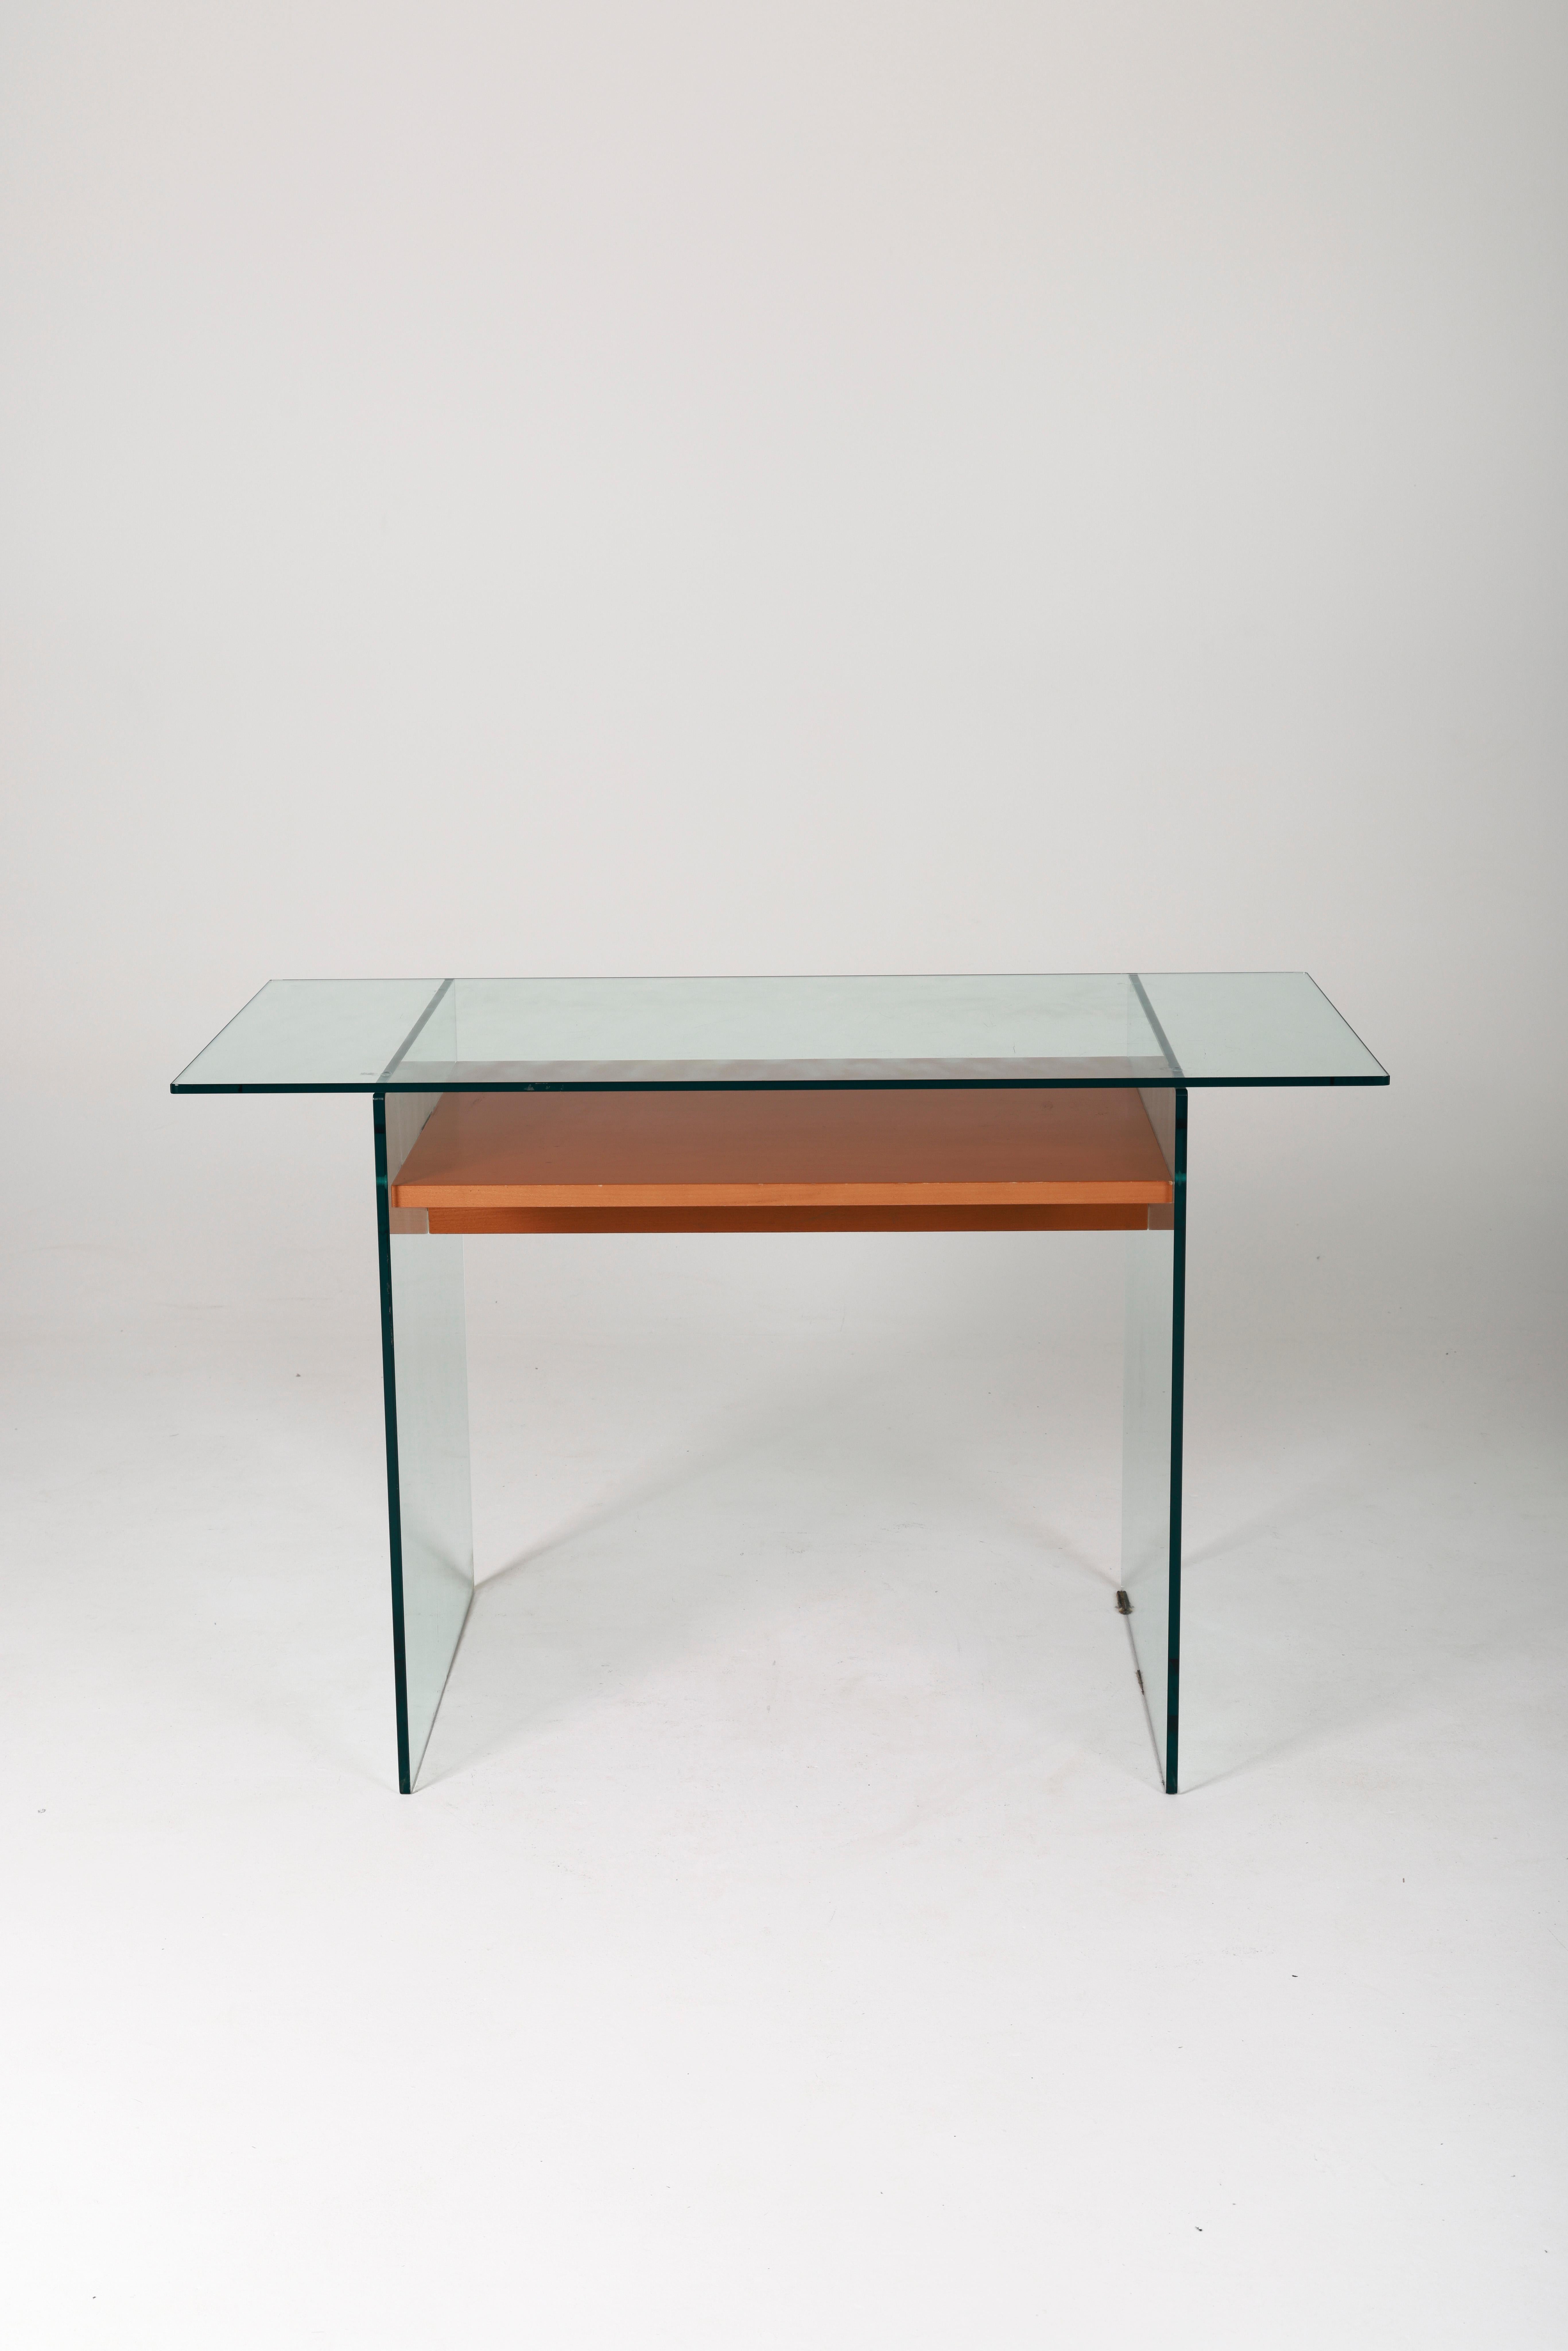 Glass and wood desk in the style of Artelano from the 1980s. The frame is made of glass, the thicker glass top, and the shelf are made of oak. This desk pairs perfectly with furniture by designers David Lange or Philippe Starck.
LP726